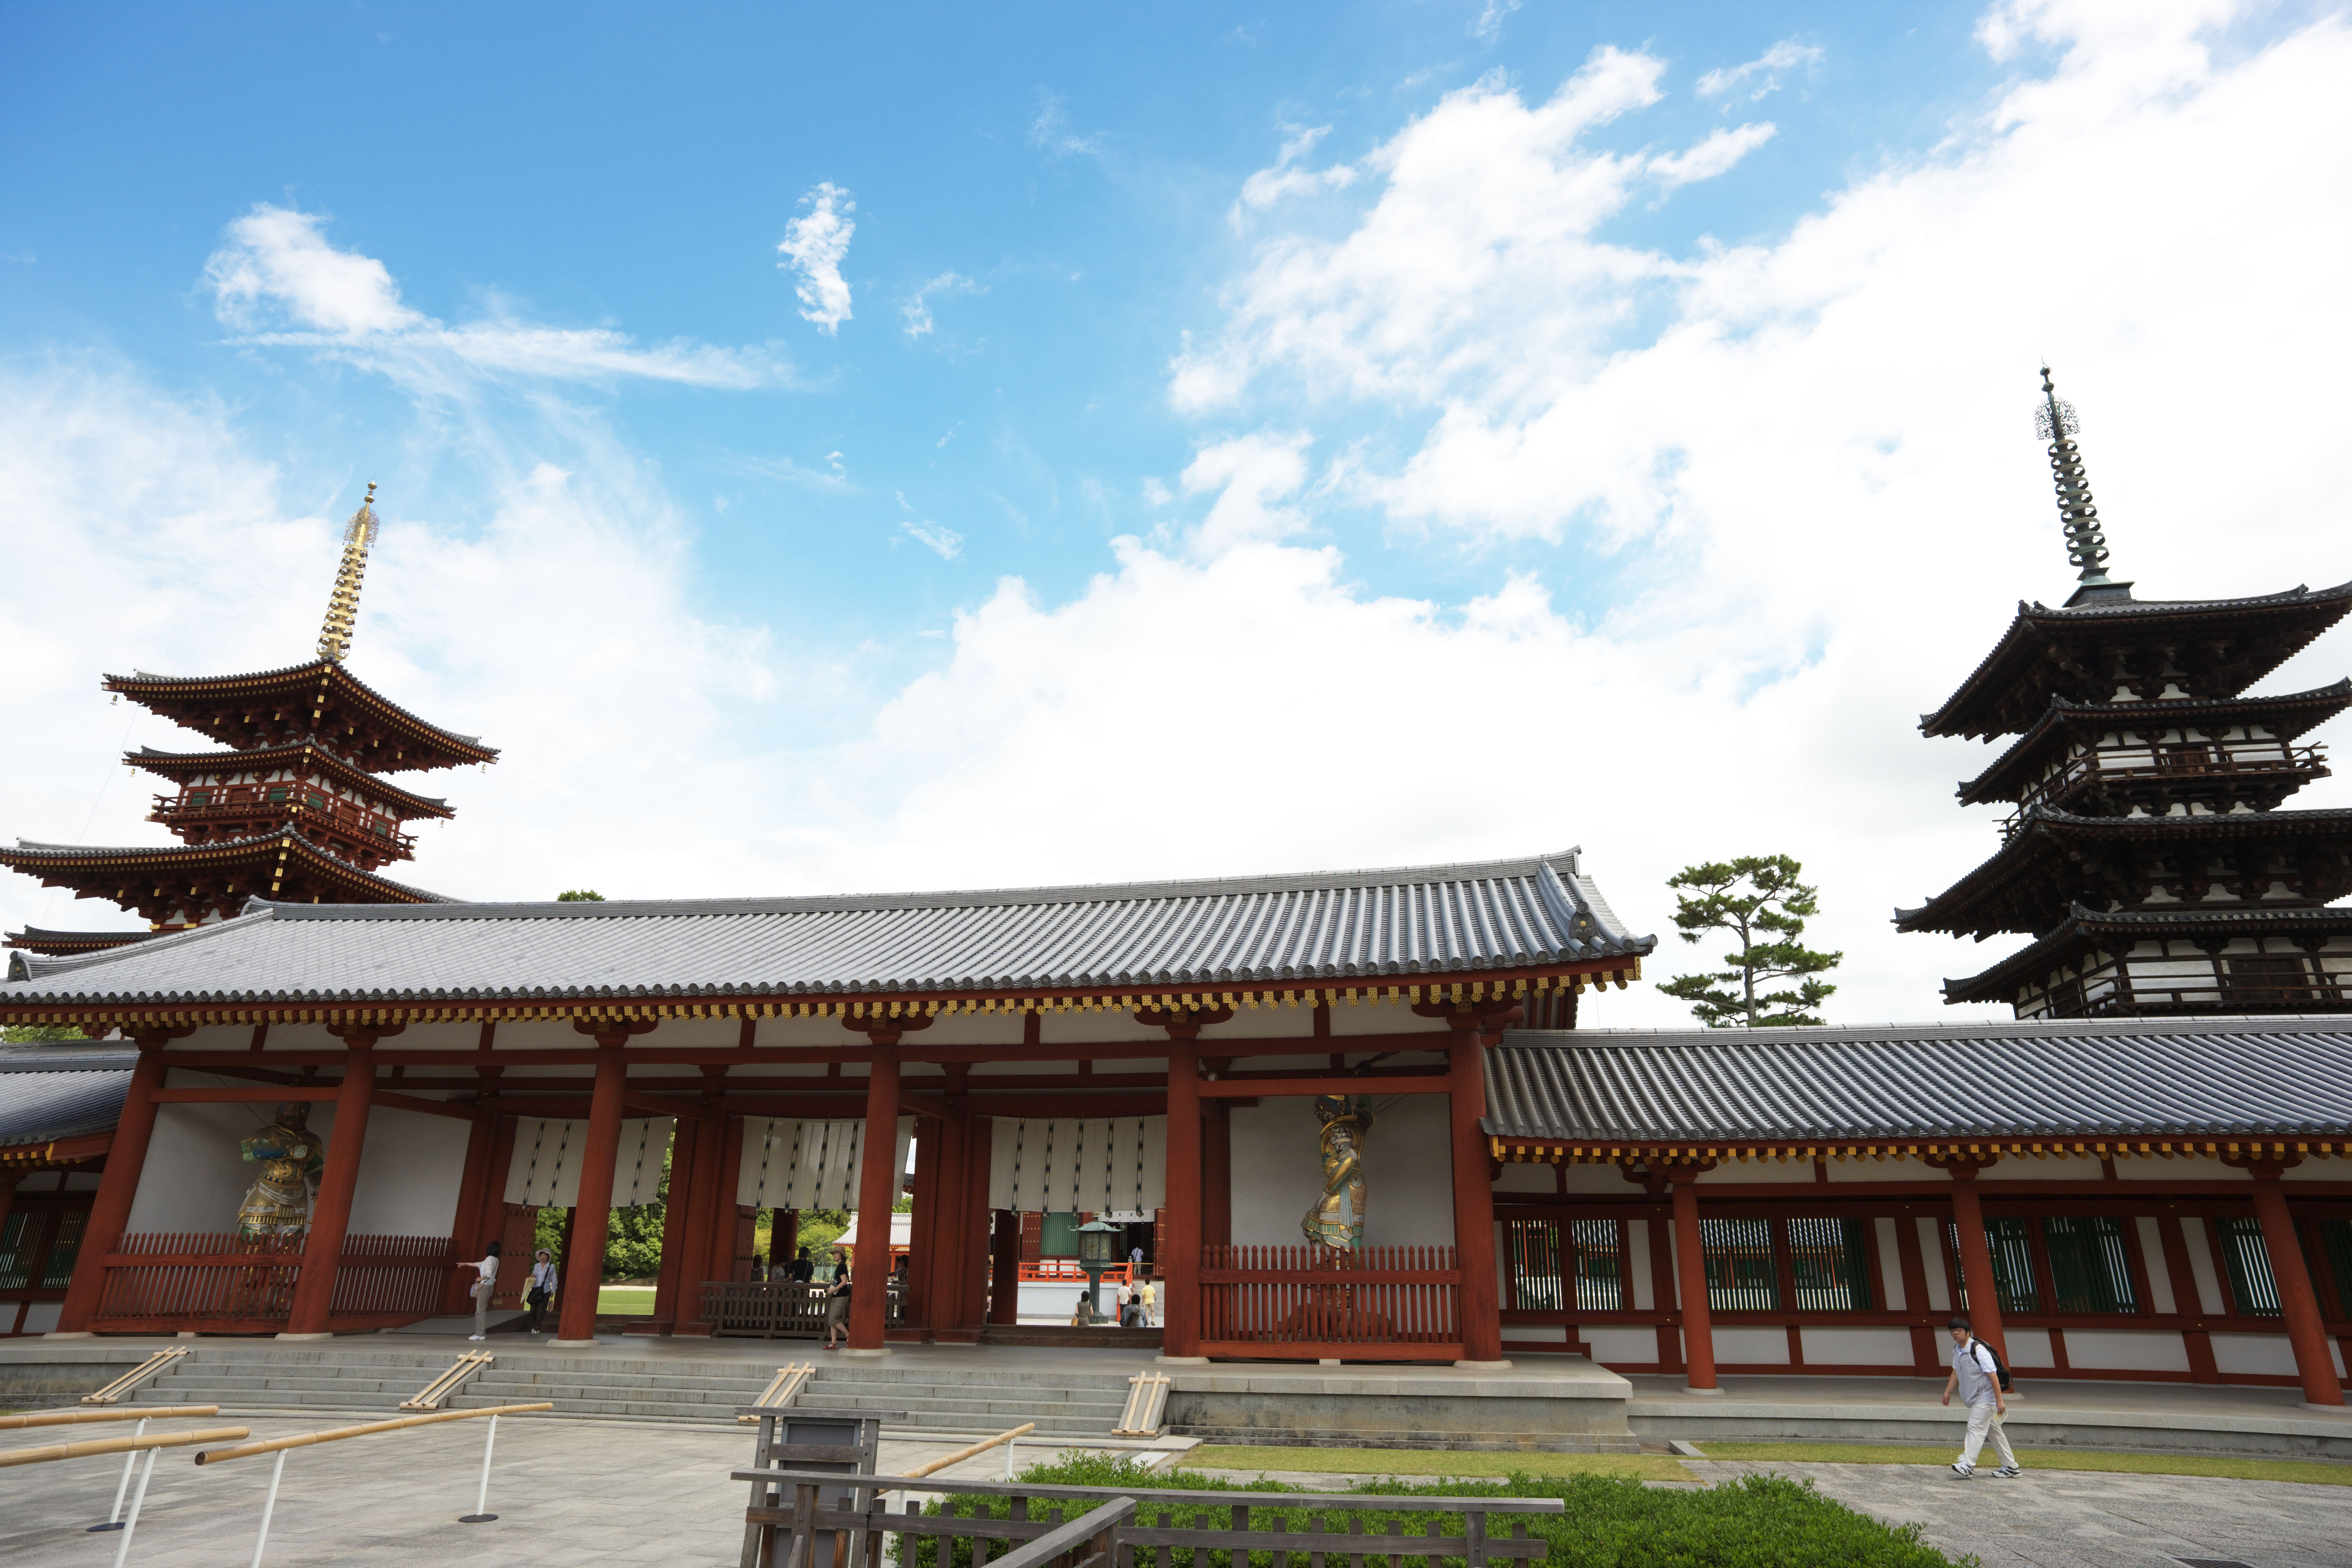 photo,material,free,landscape,picture,stock photo,Creative Commons,Yakushi-ji Temple gate built between the main gate and the main house of the palace-styled architecture in the Fujiwara period, I am painted in red, The Buddha of Healing, Buddhist monastery, Chaitya